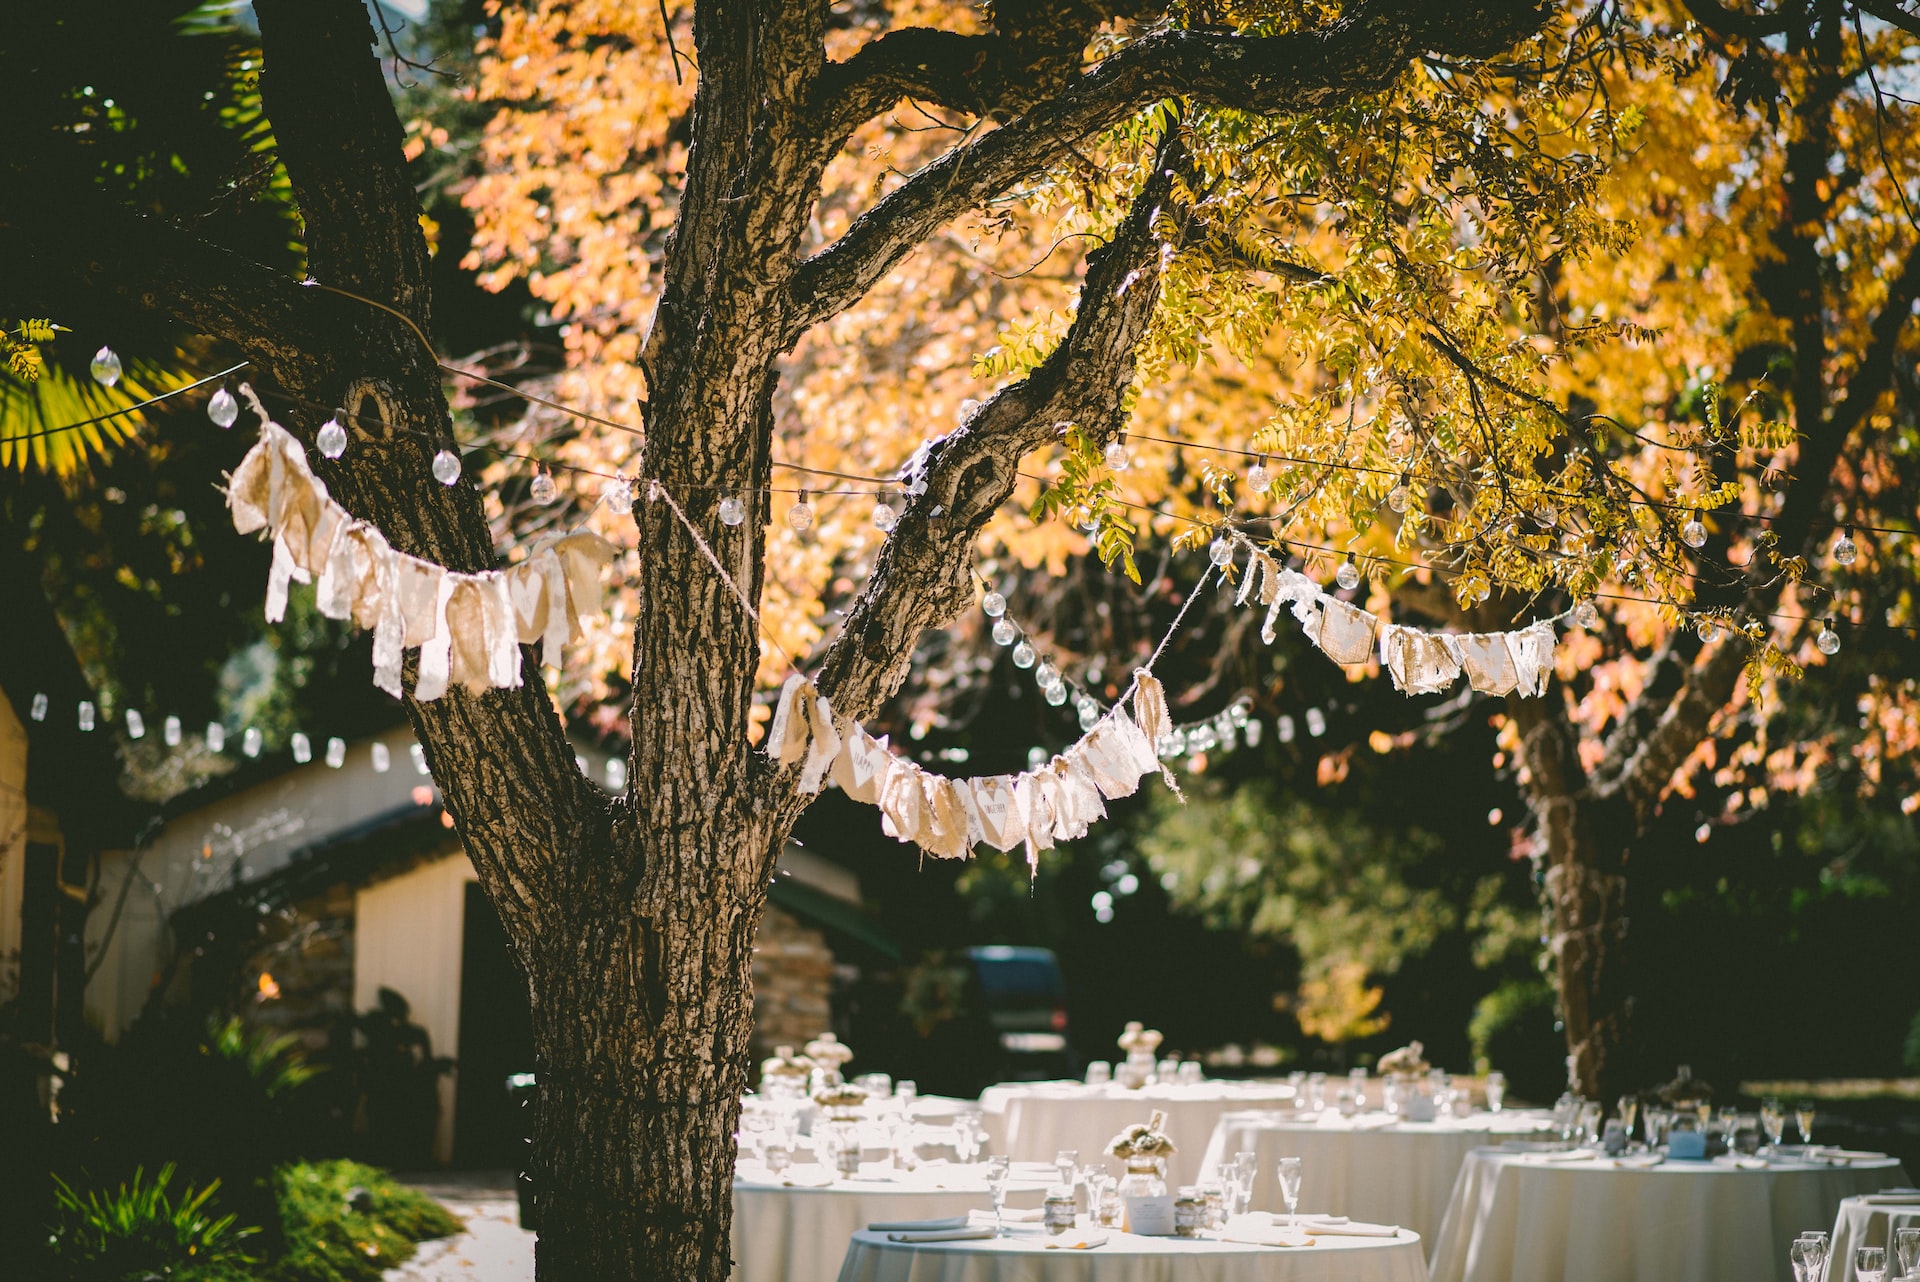 How to Host a Wedding in Your Backyard